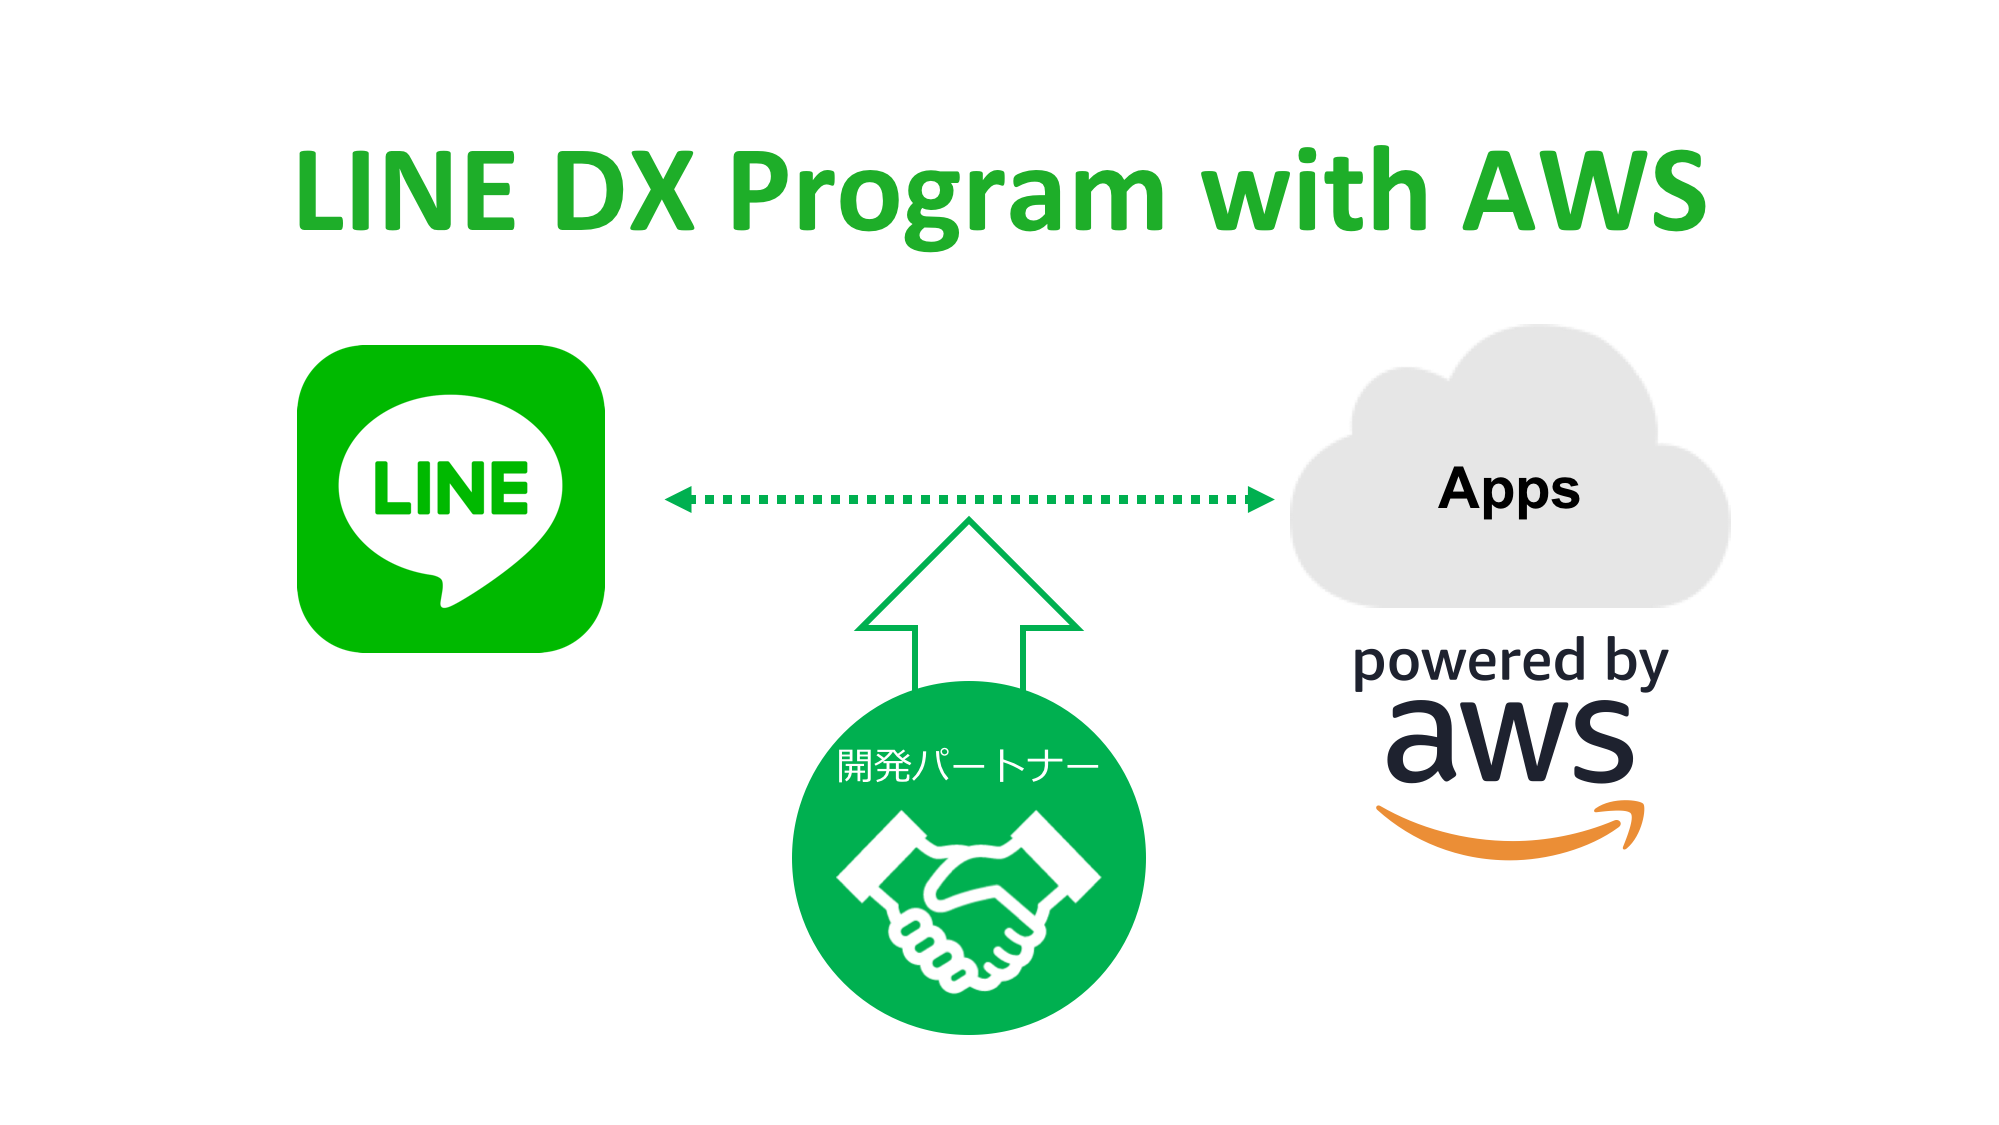 LINE、AWSを活用したDXを支援する「LINE DX Program with AWS」の提供を開始